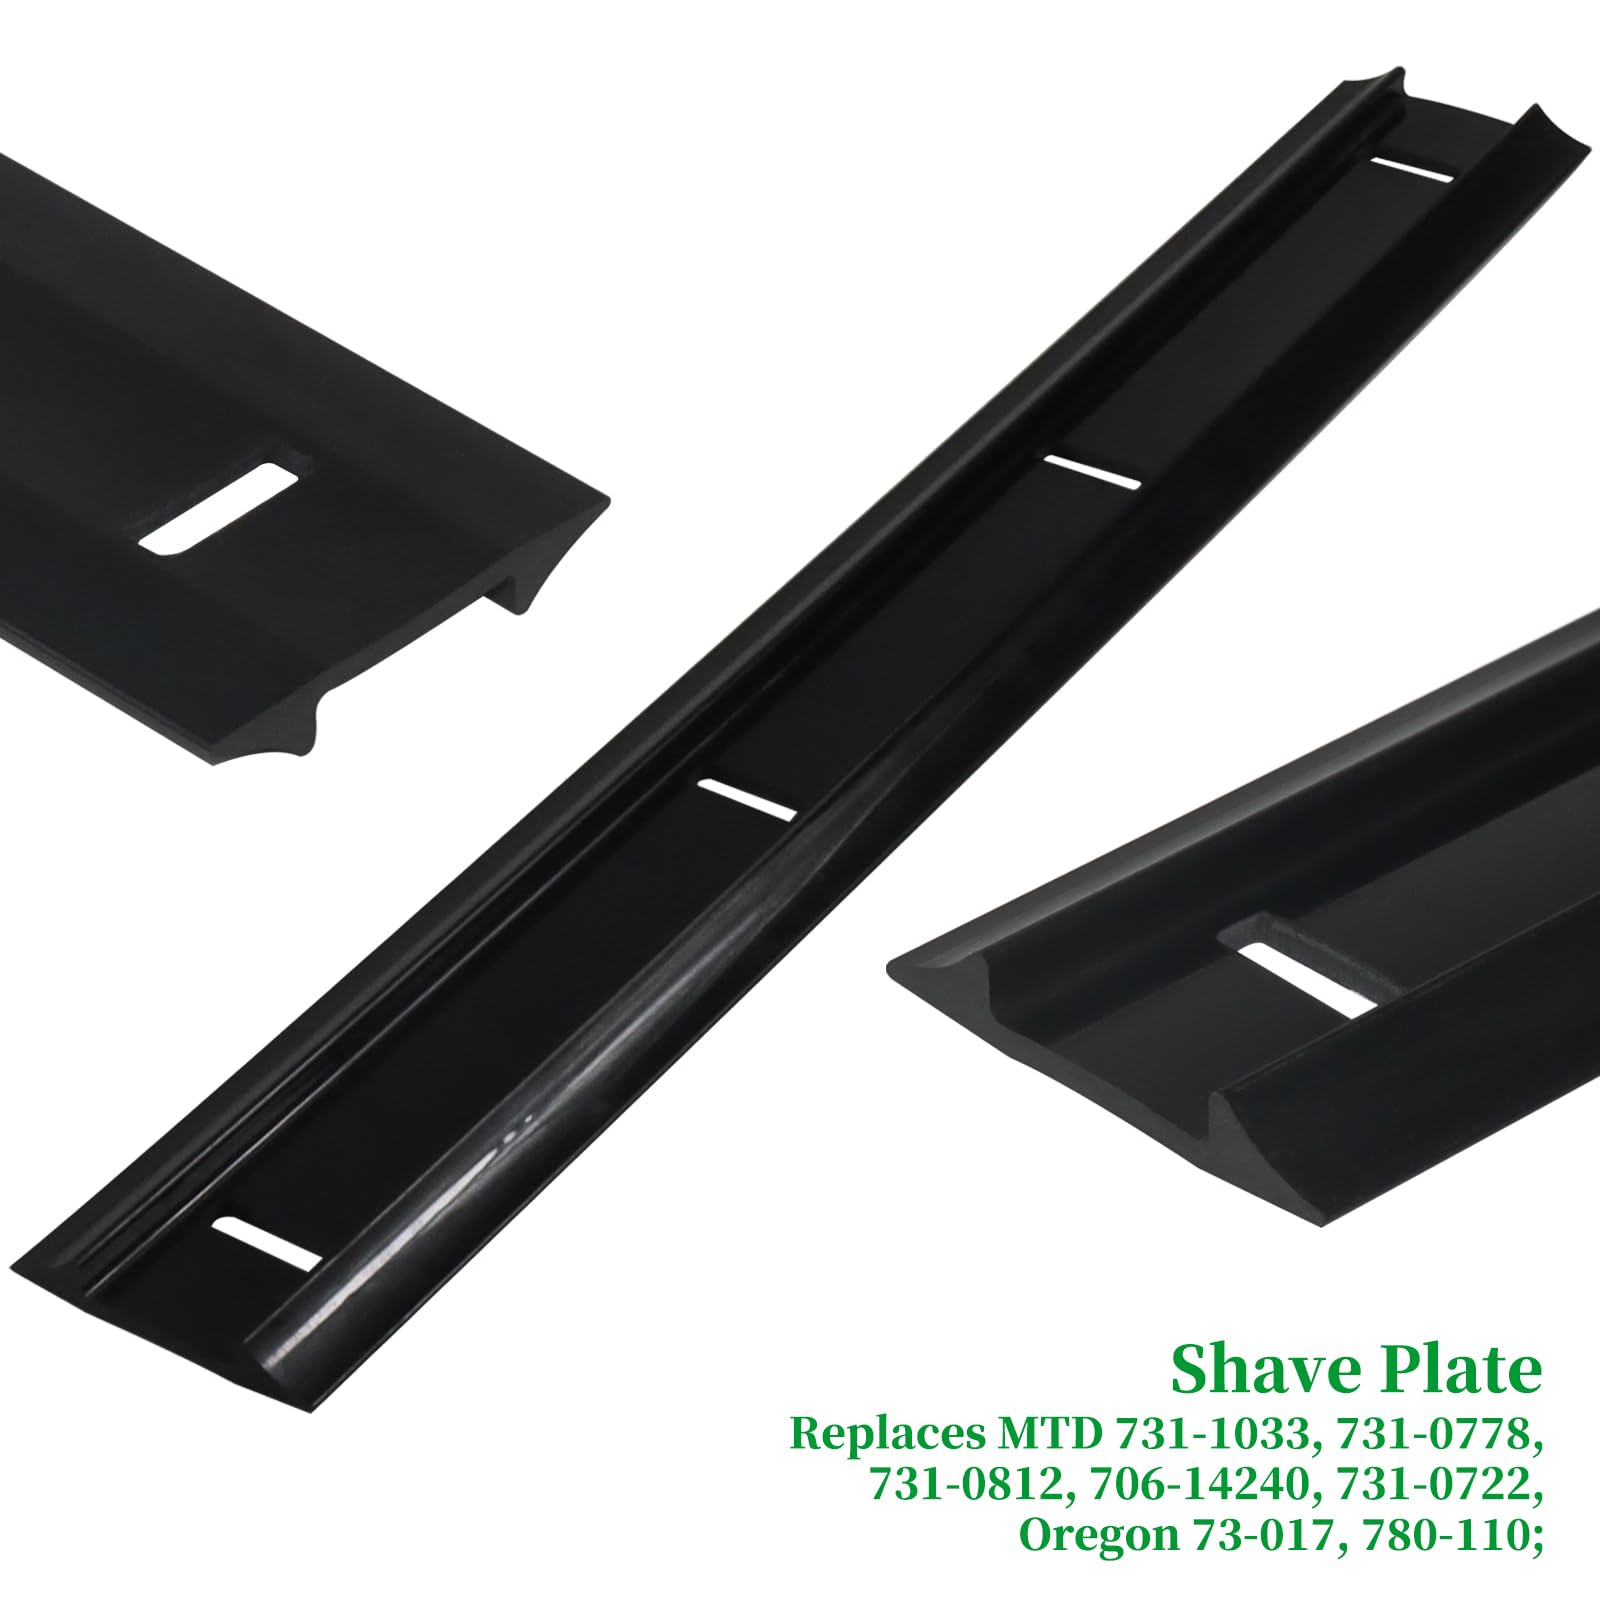 BOSFLAG 753-04472 Auger Kit with 731-1033 Shave Plate Replaces MTD 735-04032, 735-04033, 735 04033 for White Outdoor SB221, SB521, SB721, Troy-Bilt 210, 2100, 521, 5521, 721, Squall 21" Snow Throwers